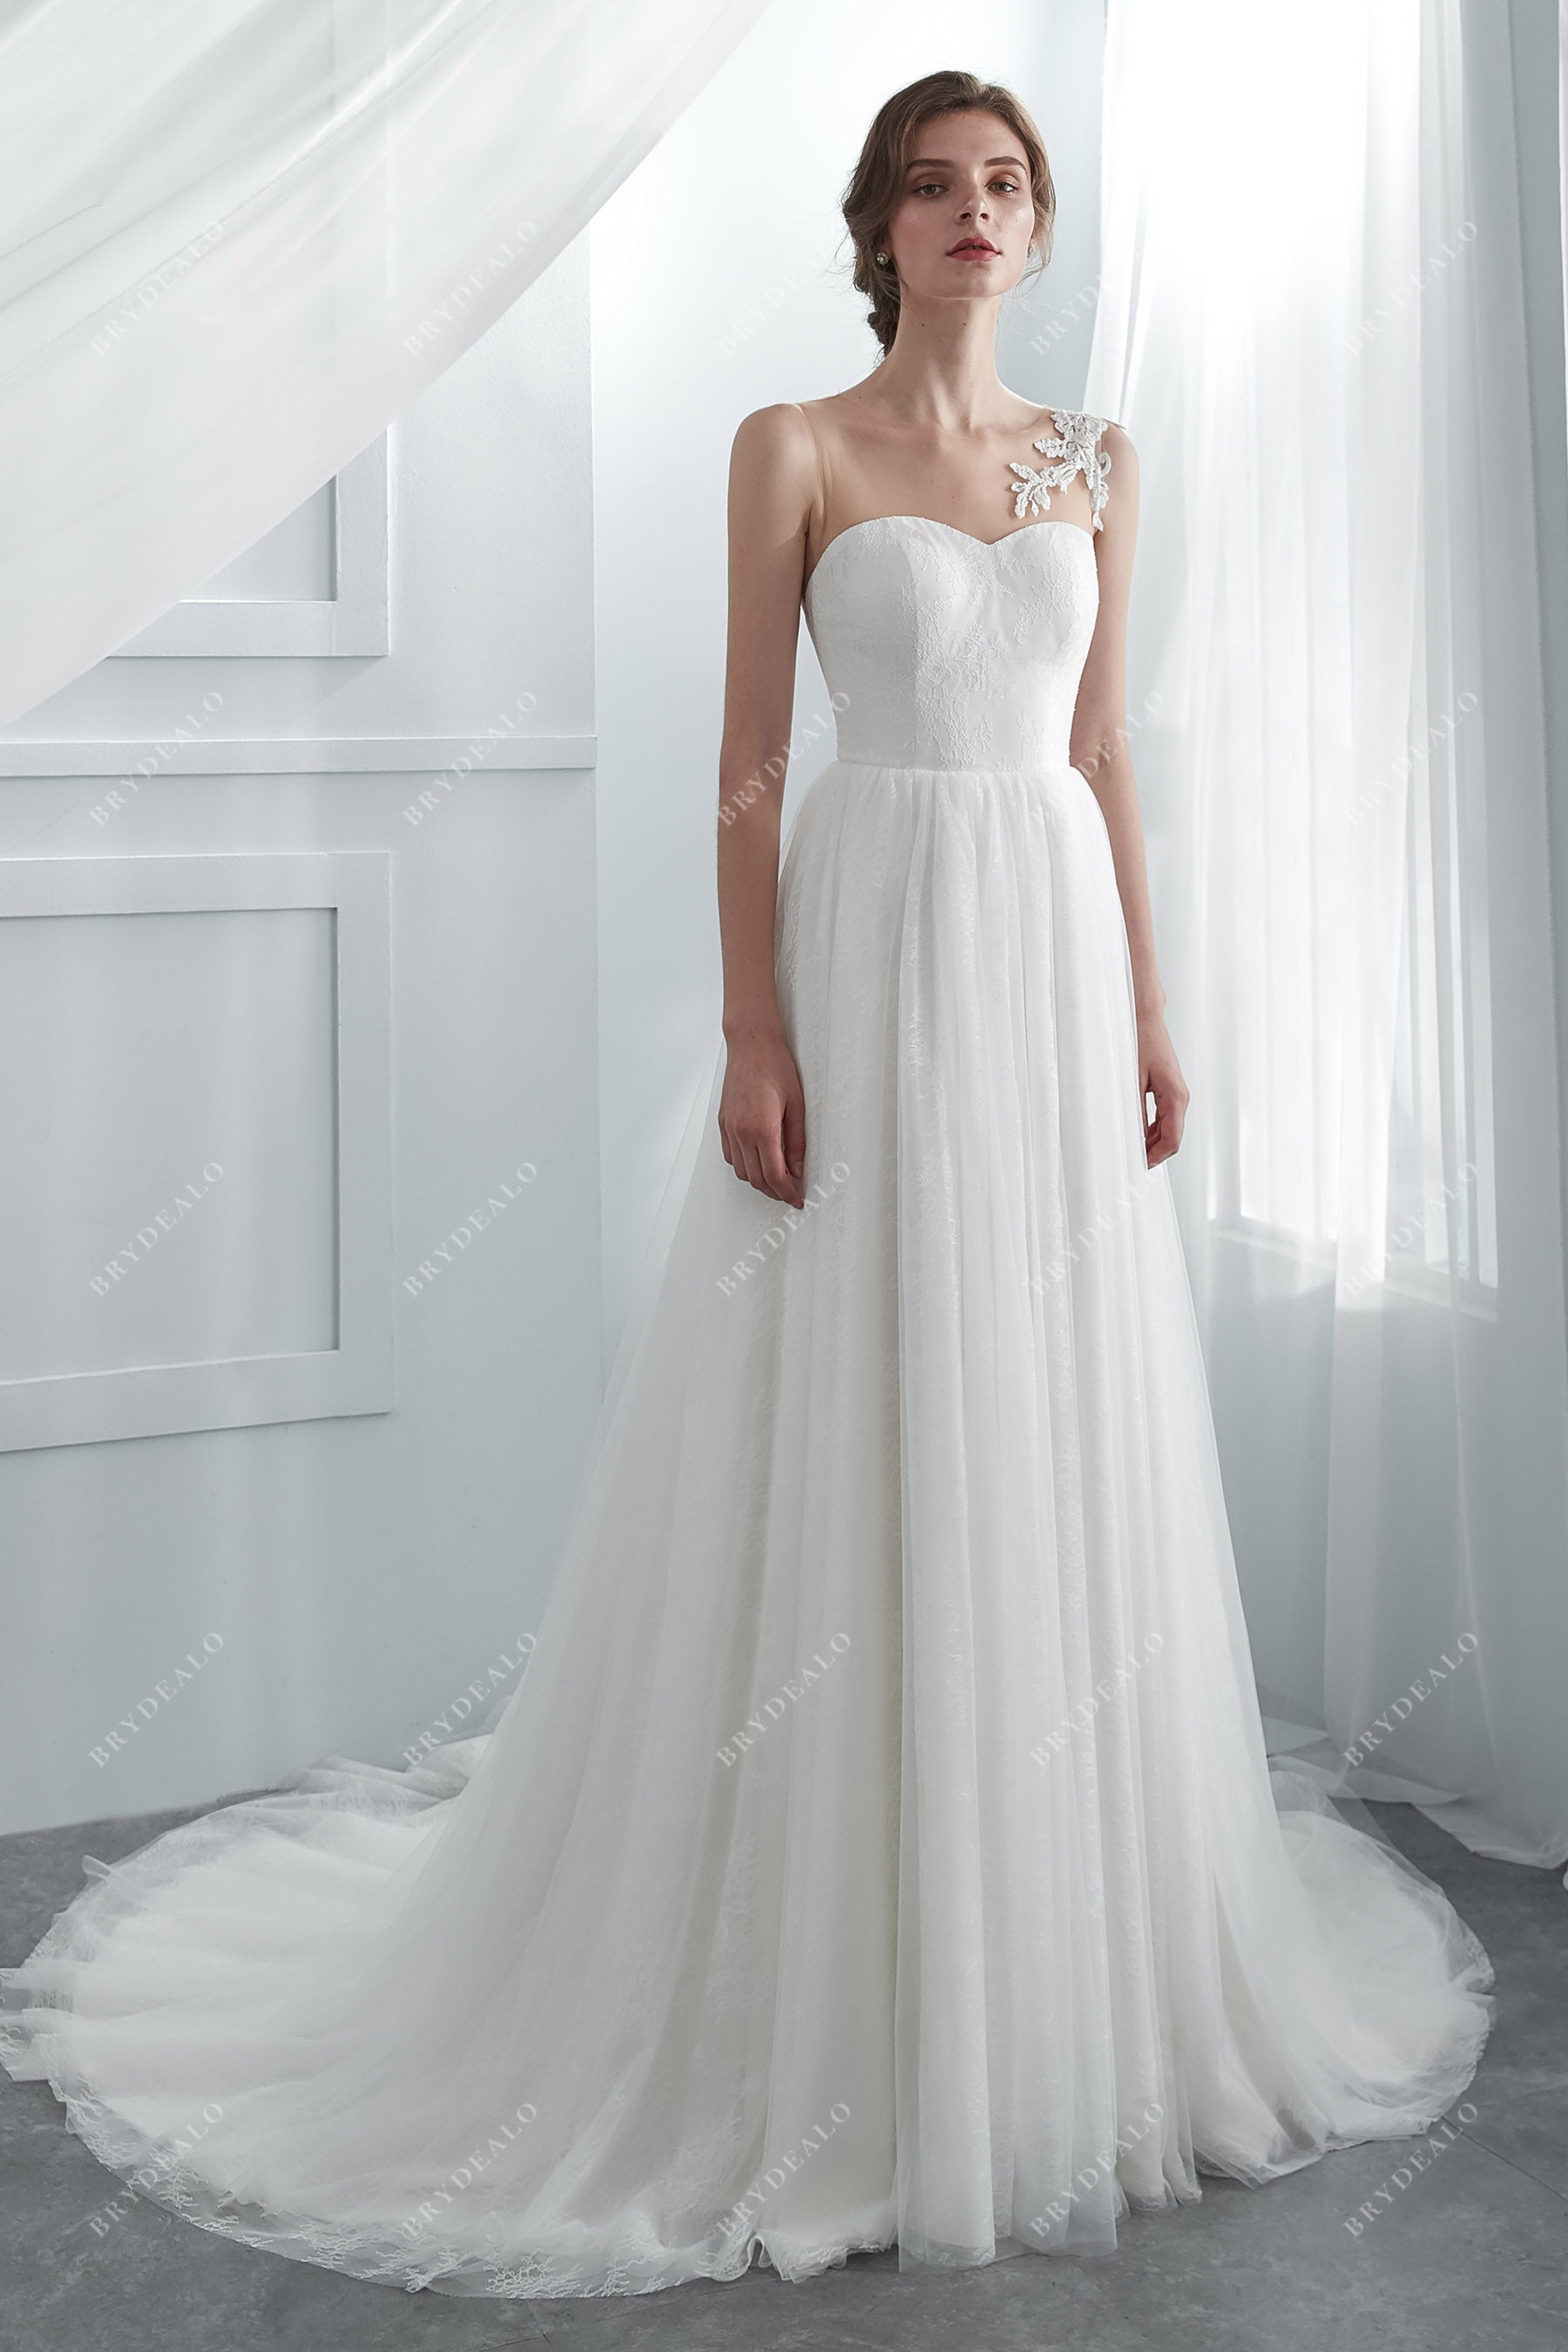 Private Label Designer Beaded Lace Illusion A-line Bridal Gown